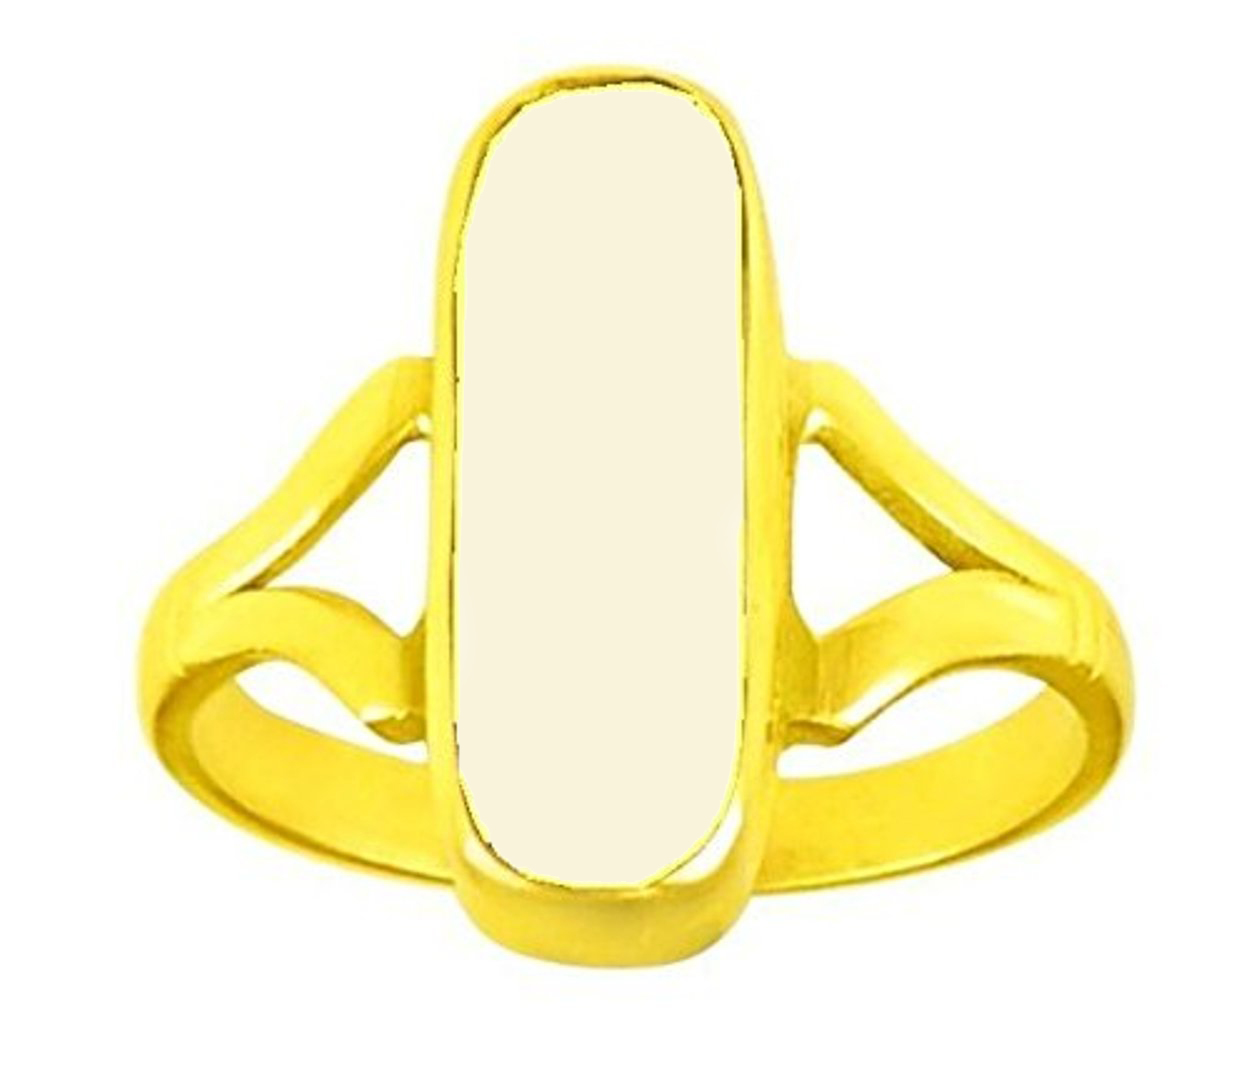 Senroar Natural Pukhraj Panch Dhatu Ring (5 - 7 ct) Copper Sapphire Gold  Plated Ring Price in India - Buy Senroar Natural Pukhraj Panch Dhatu Ring  (5 - 7 ct) Copper Sapphire